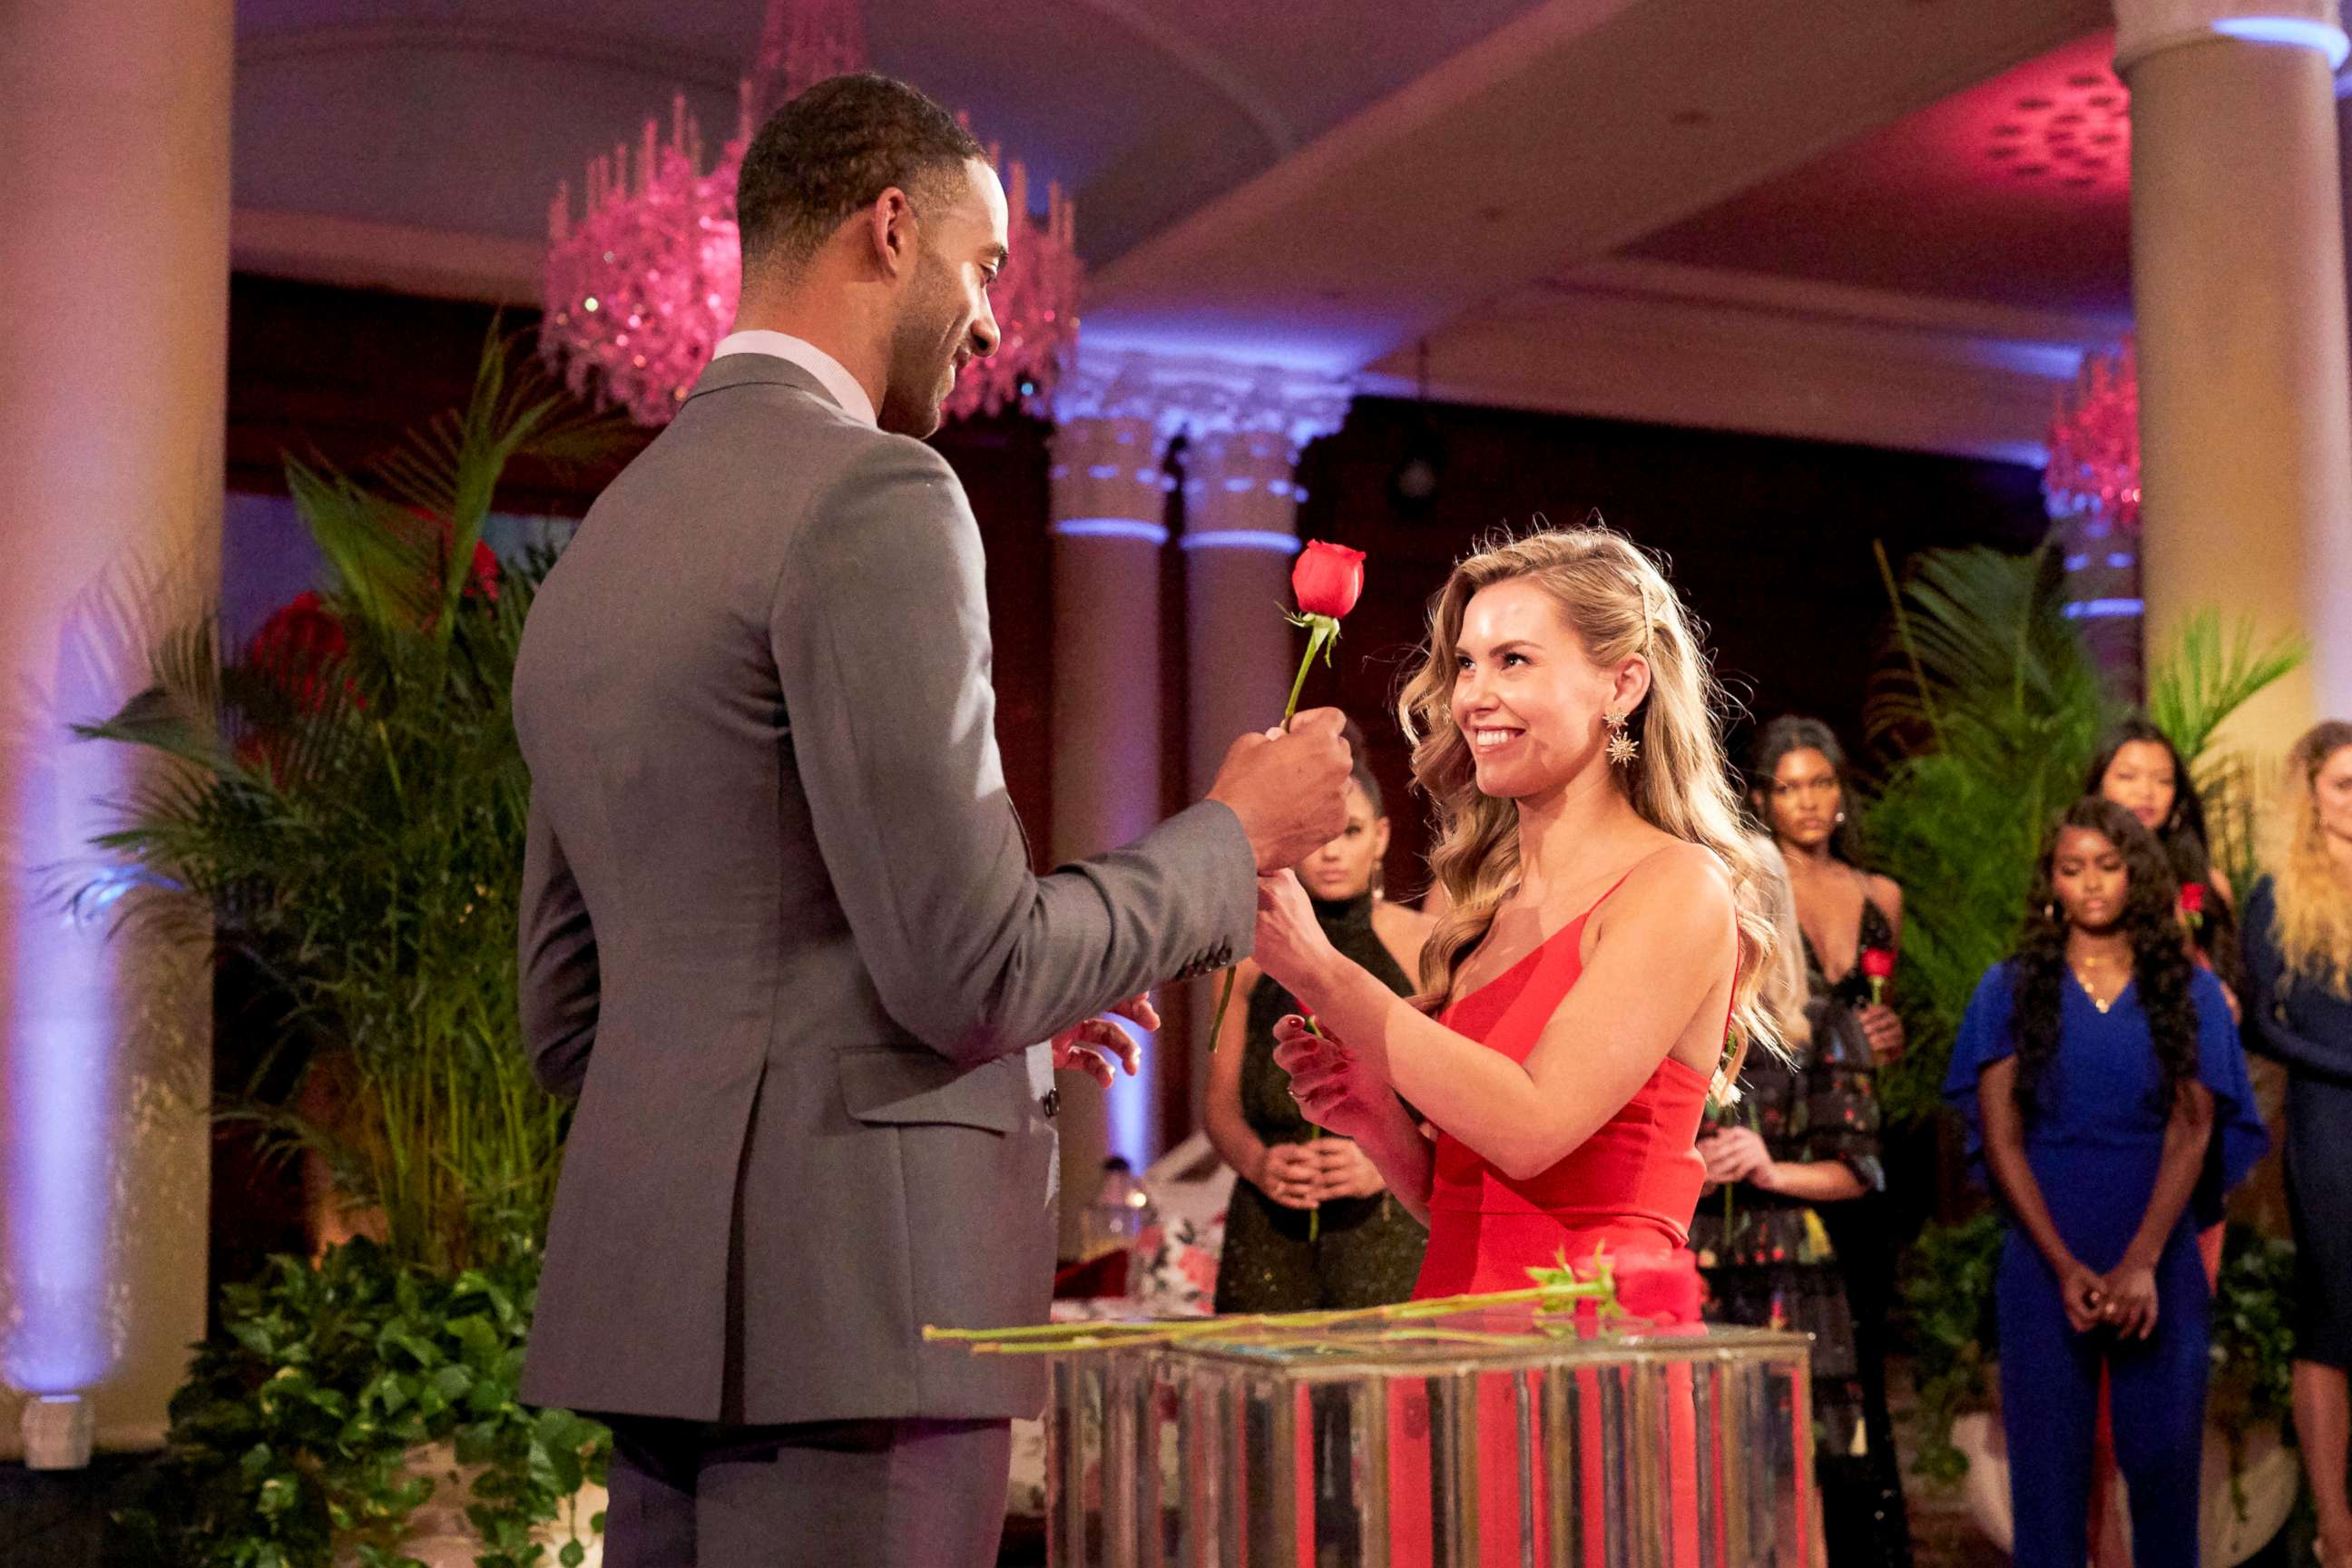 PHOTO: Matt James gives Anna a rose during a scene from "The Bachelor."